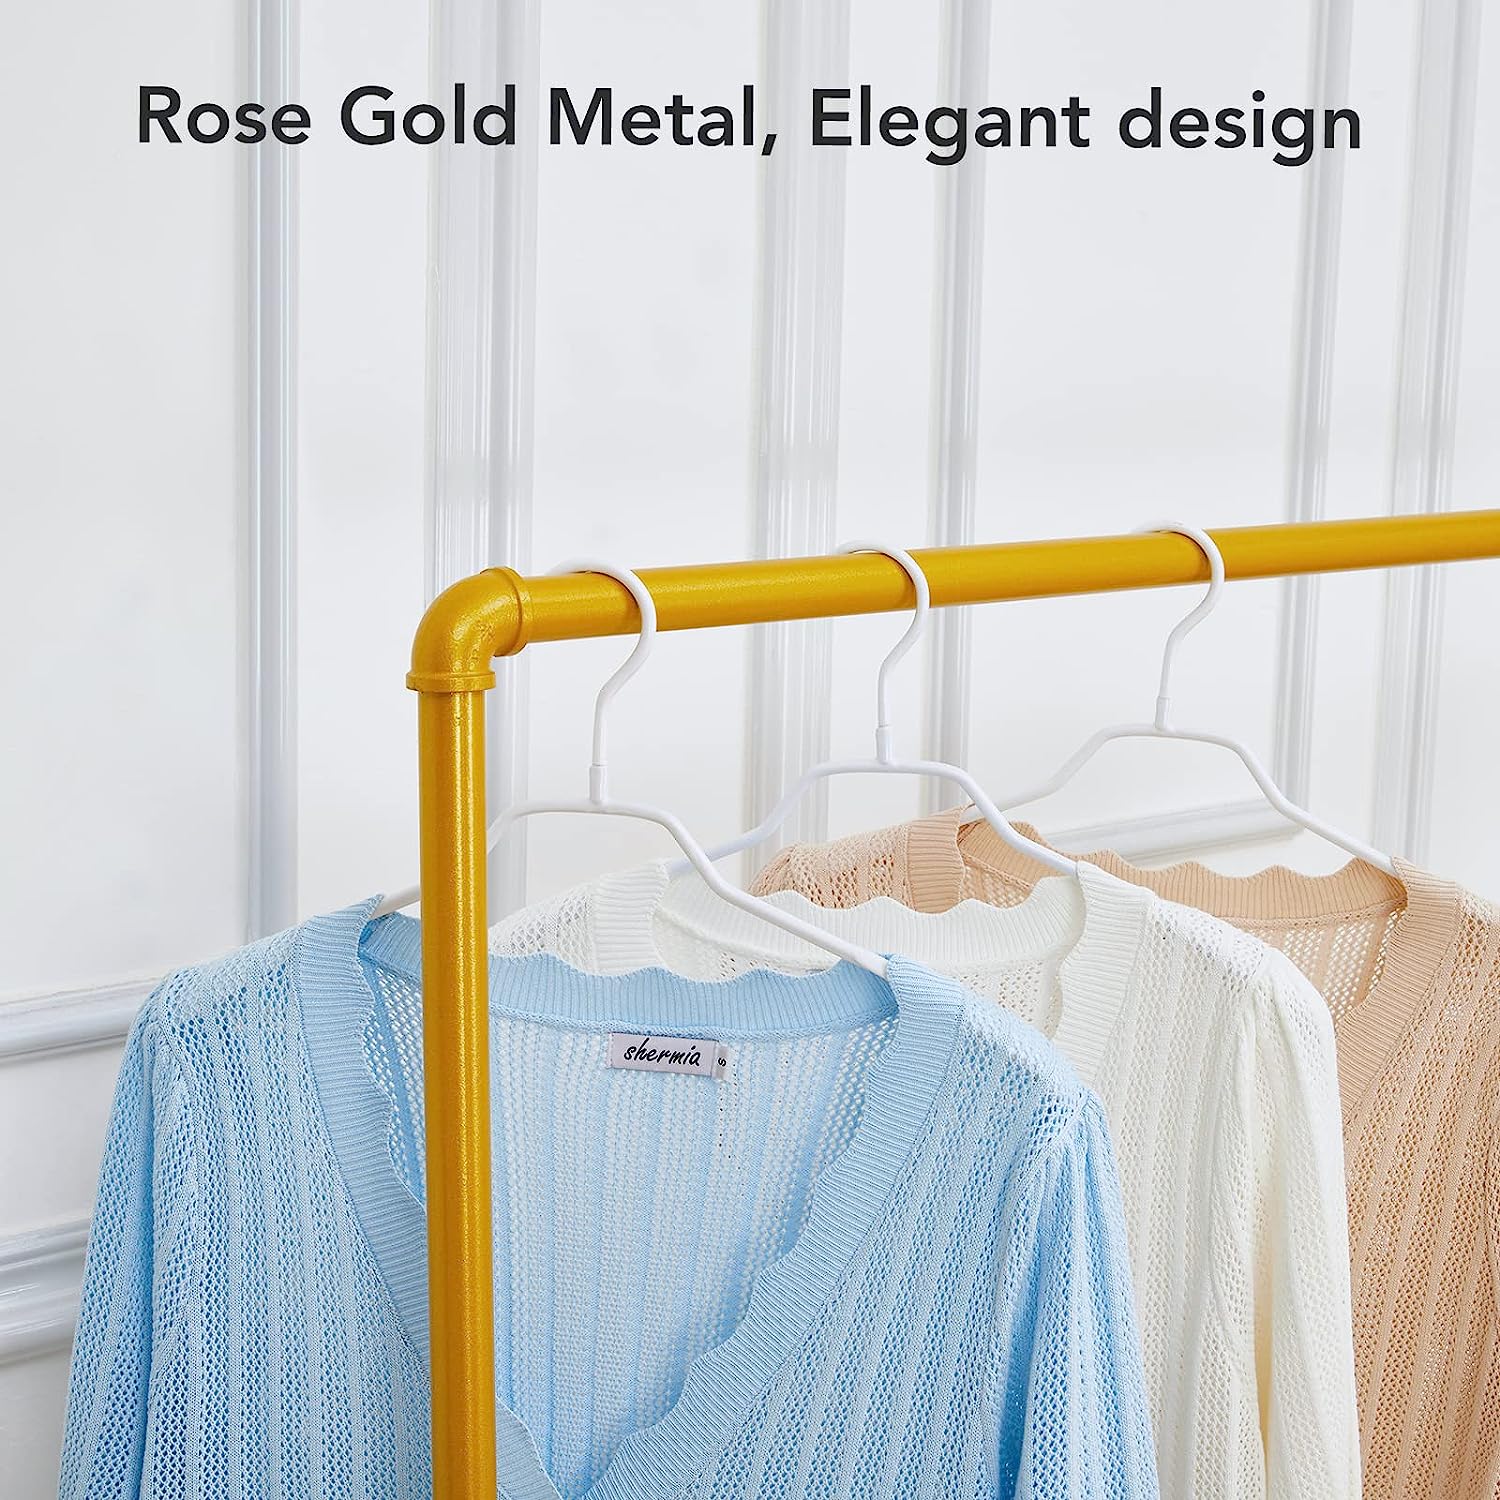 Gold Metal Clothing Rack on Wheels, Boutiques Retail Display Clothing Rack with Wood Shelf, Rolling Garment Rack for Hanging Clothes, Coats, Skirts